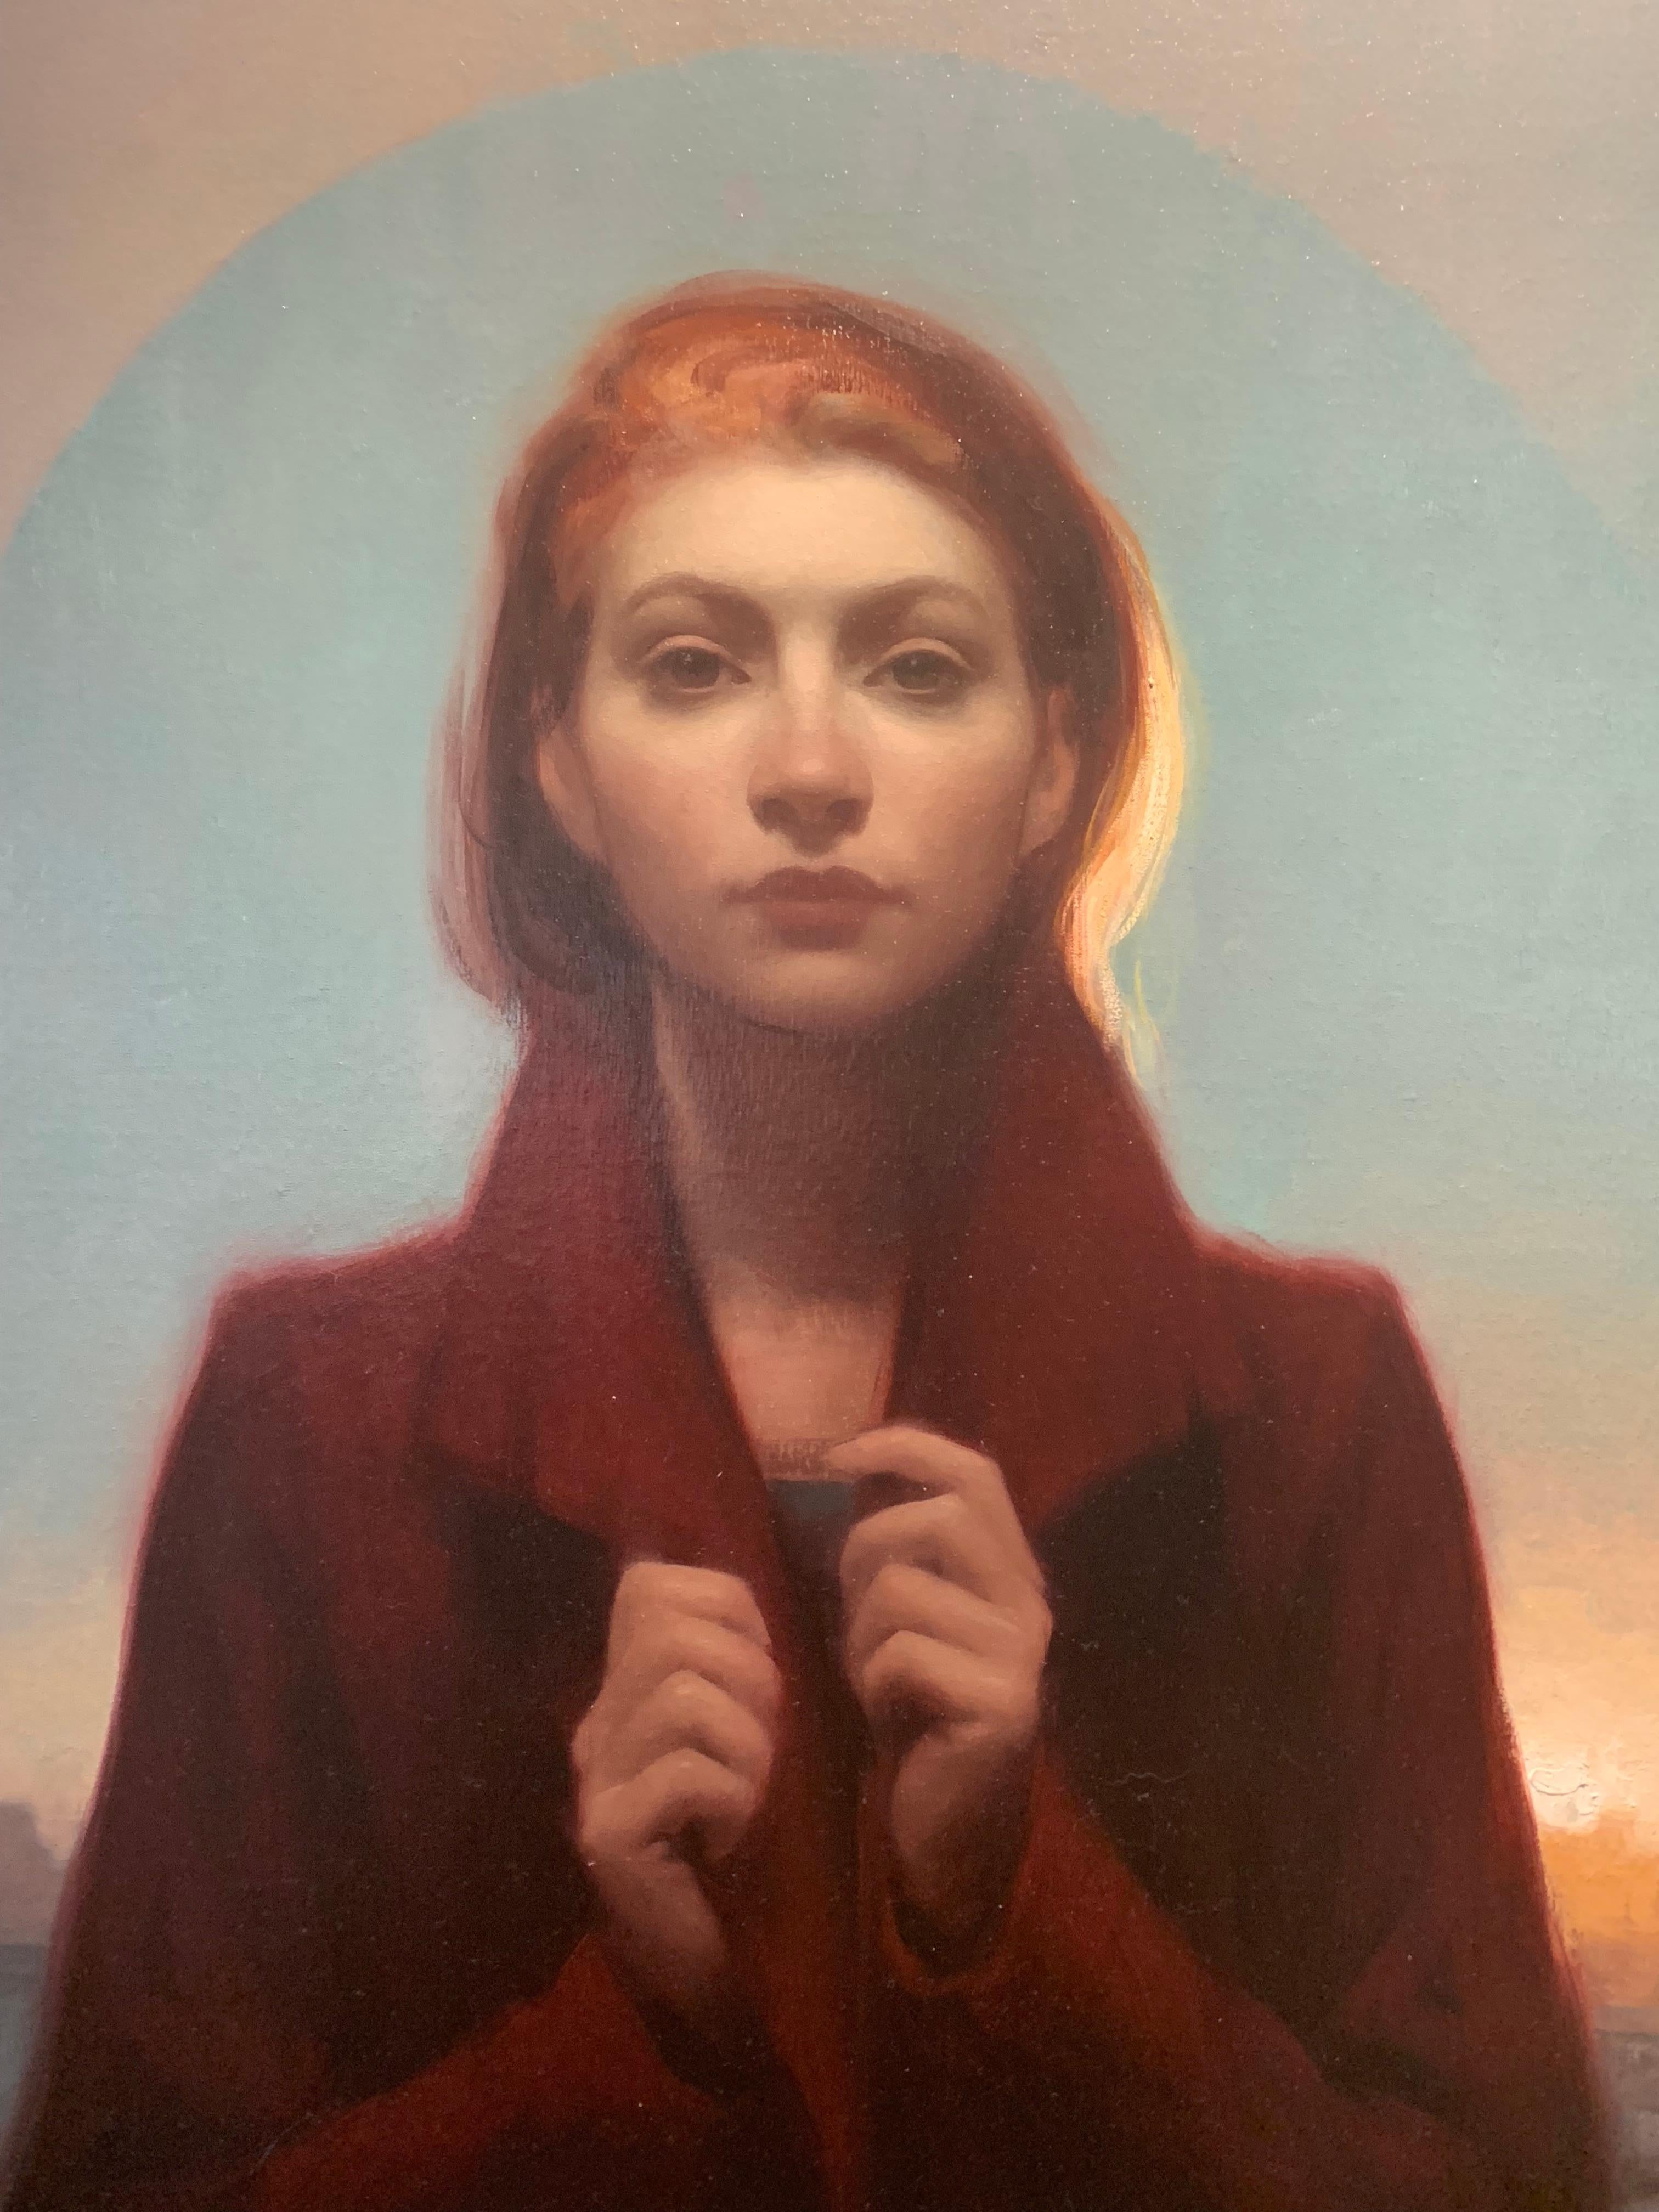 An oil on linen painting of a woman, centrally placed, backlit by a setting sun on a skyline horizon.

